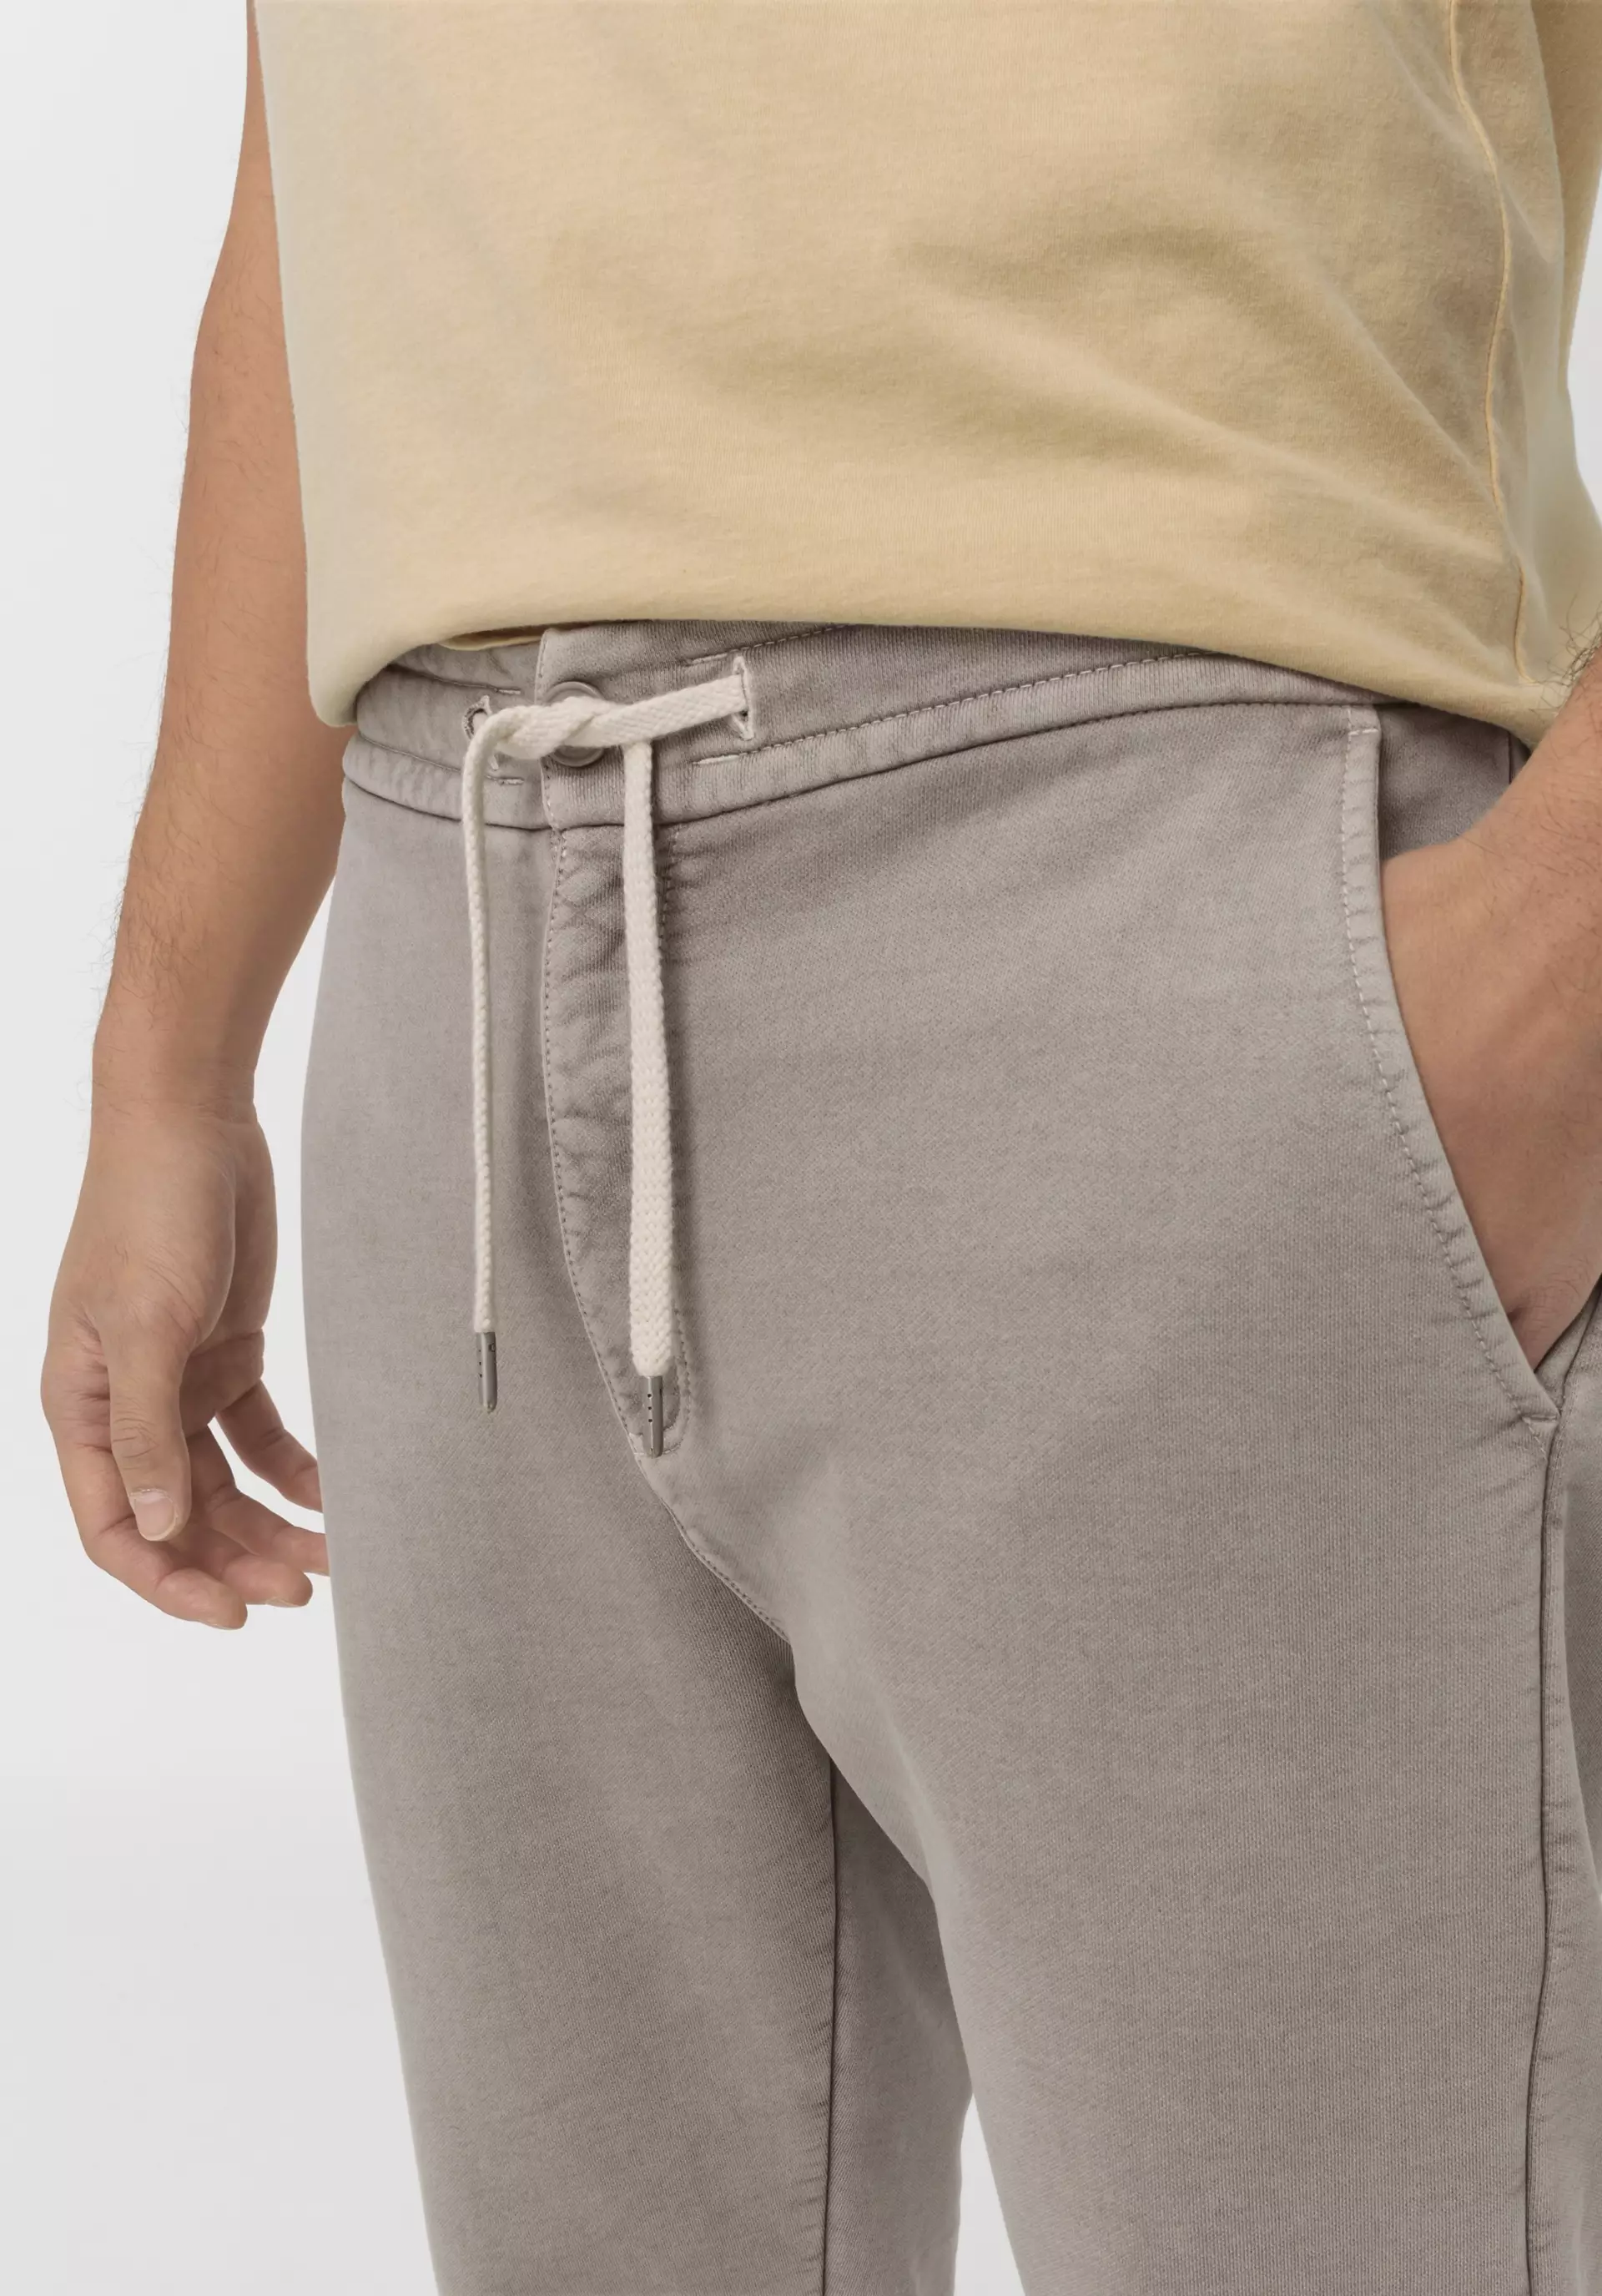 Jogging pants, mineral-dyed, made of pure organic cotton - 2